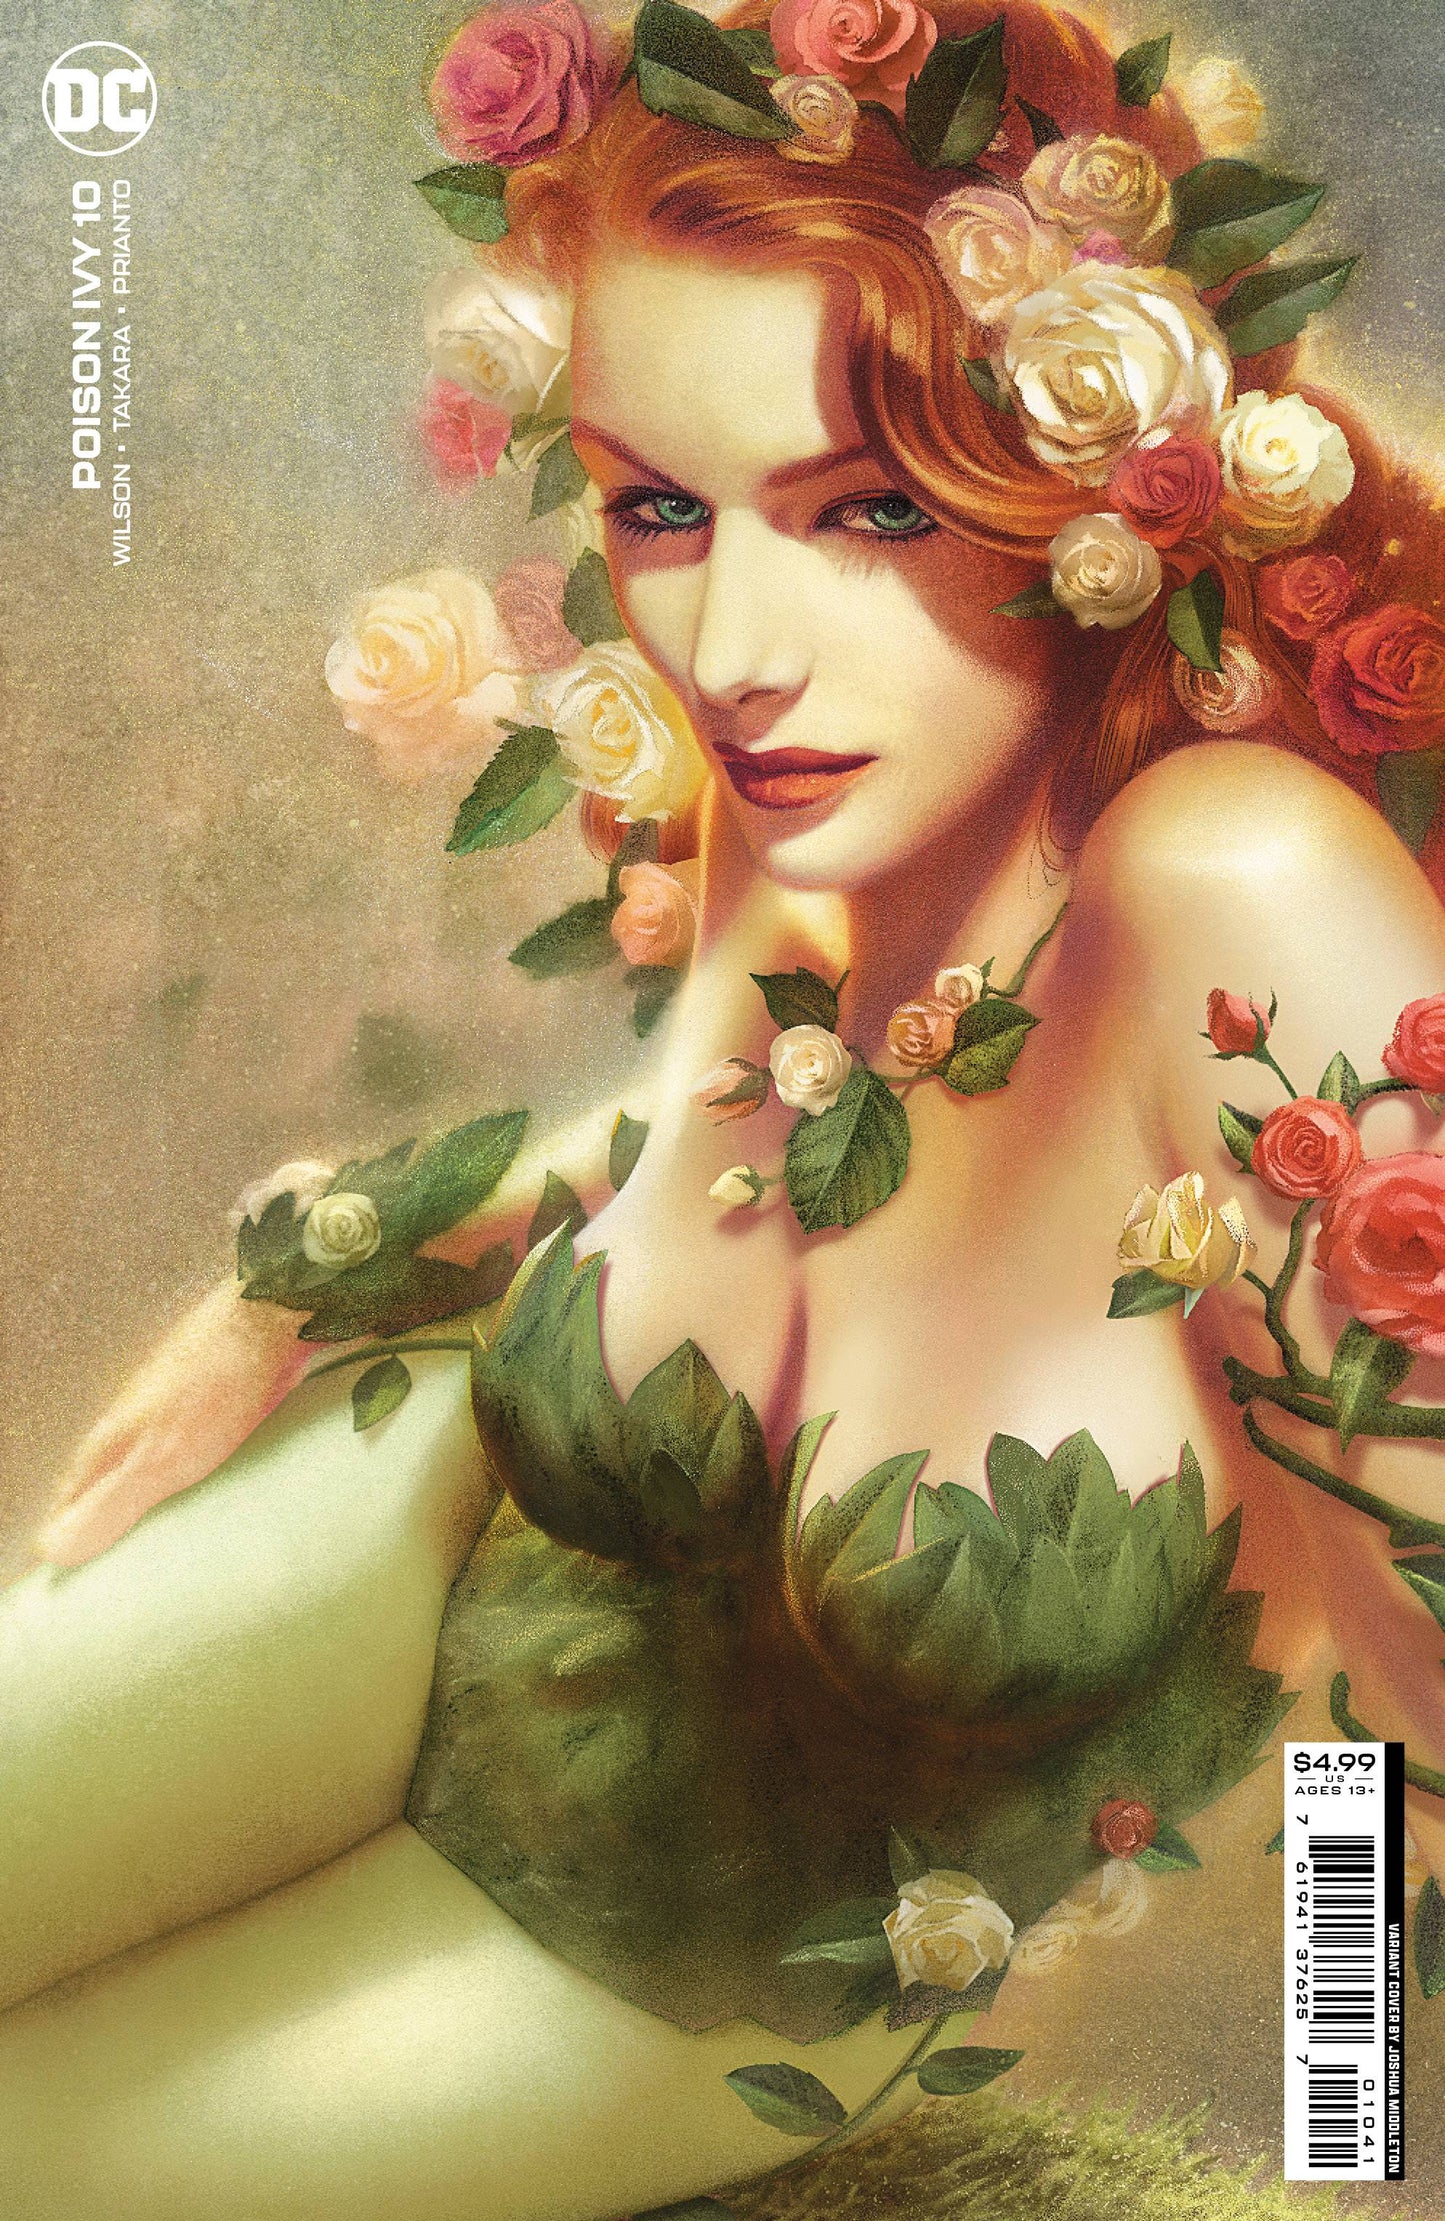 POISON IVY #10 | Select Variant Covers |